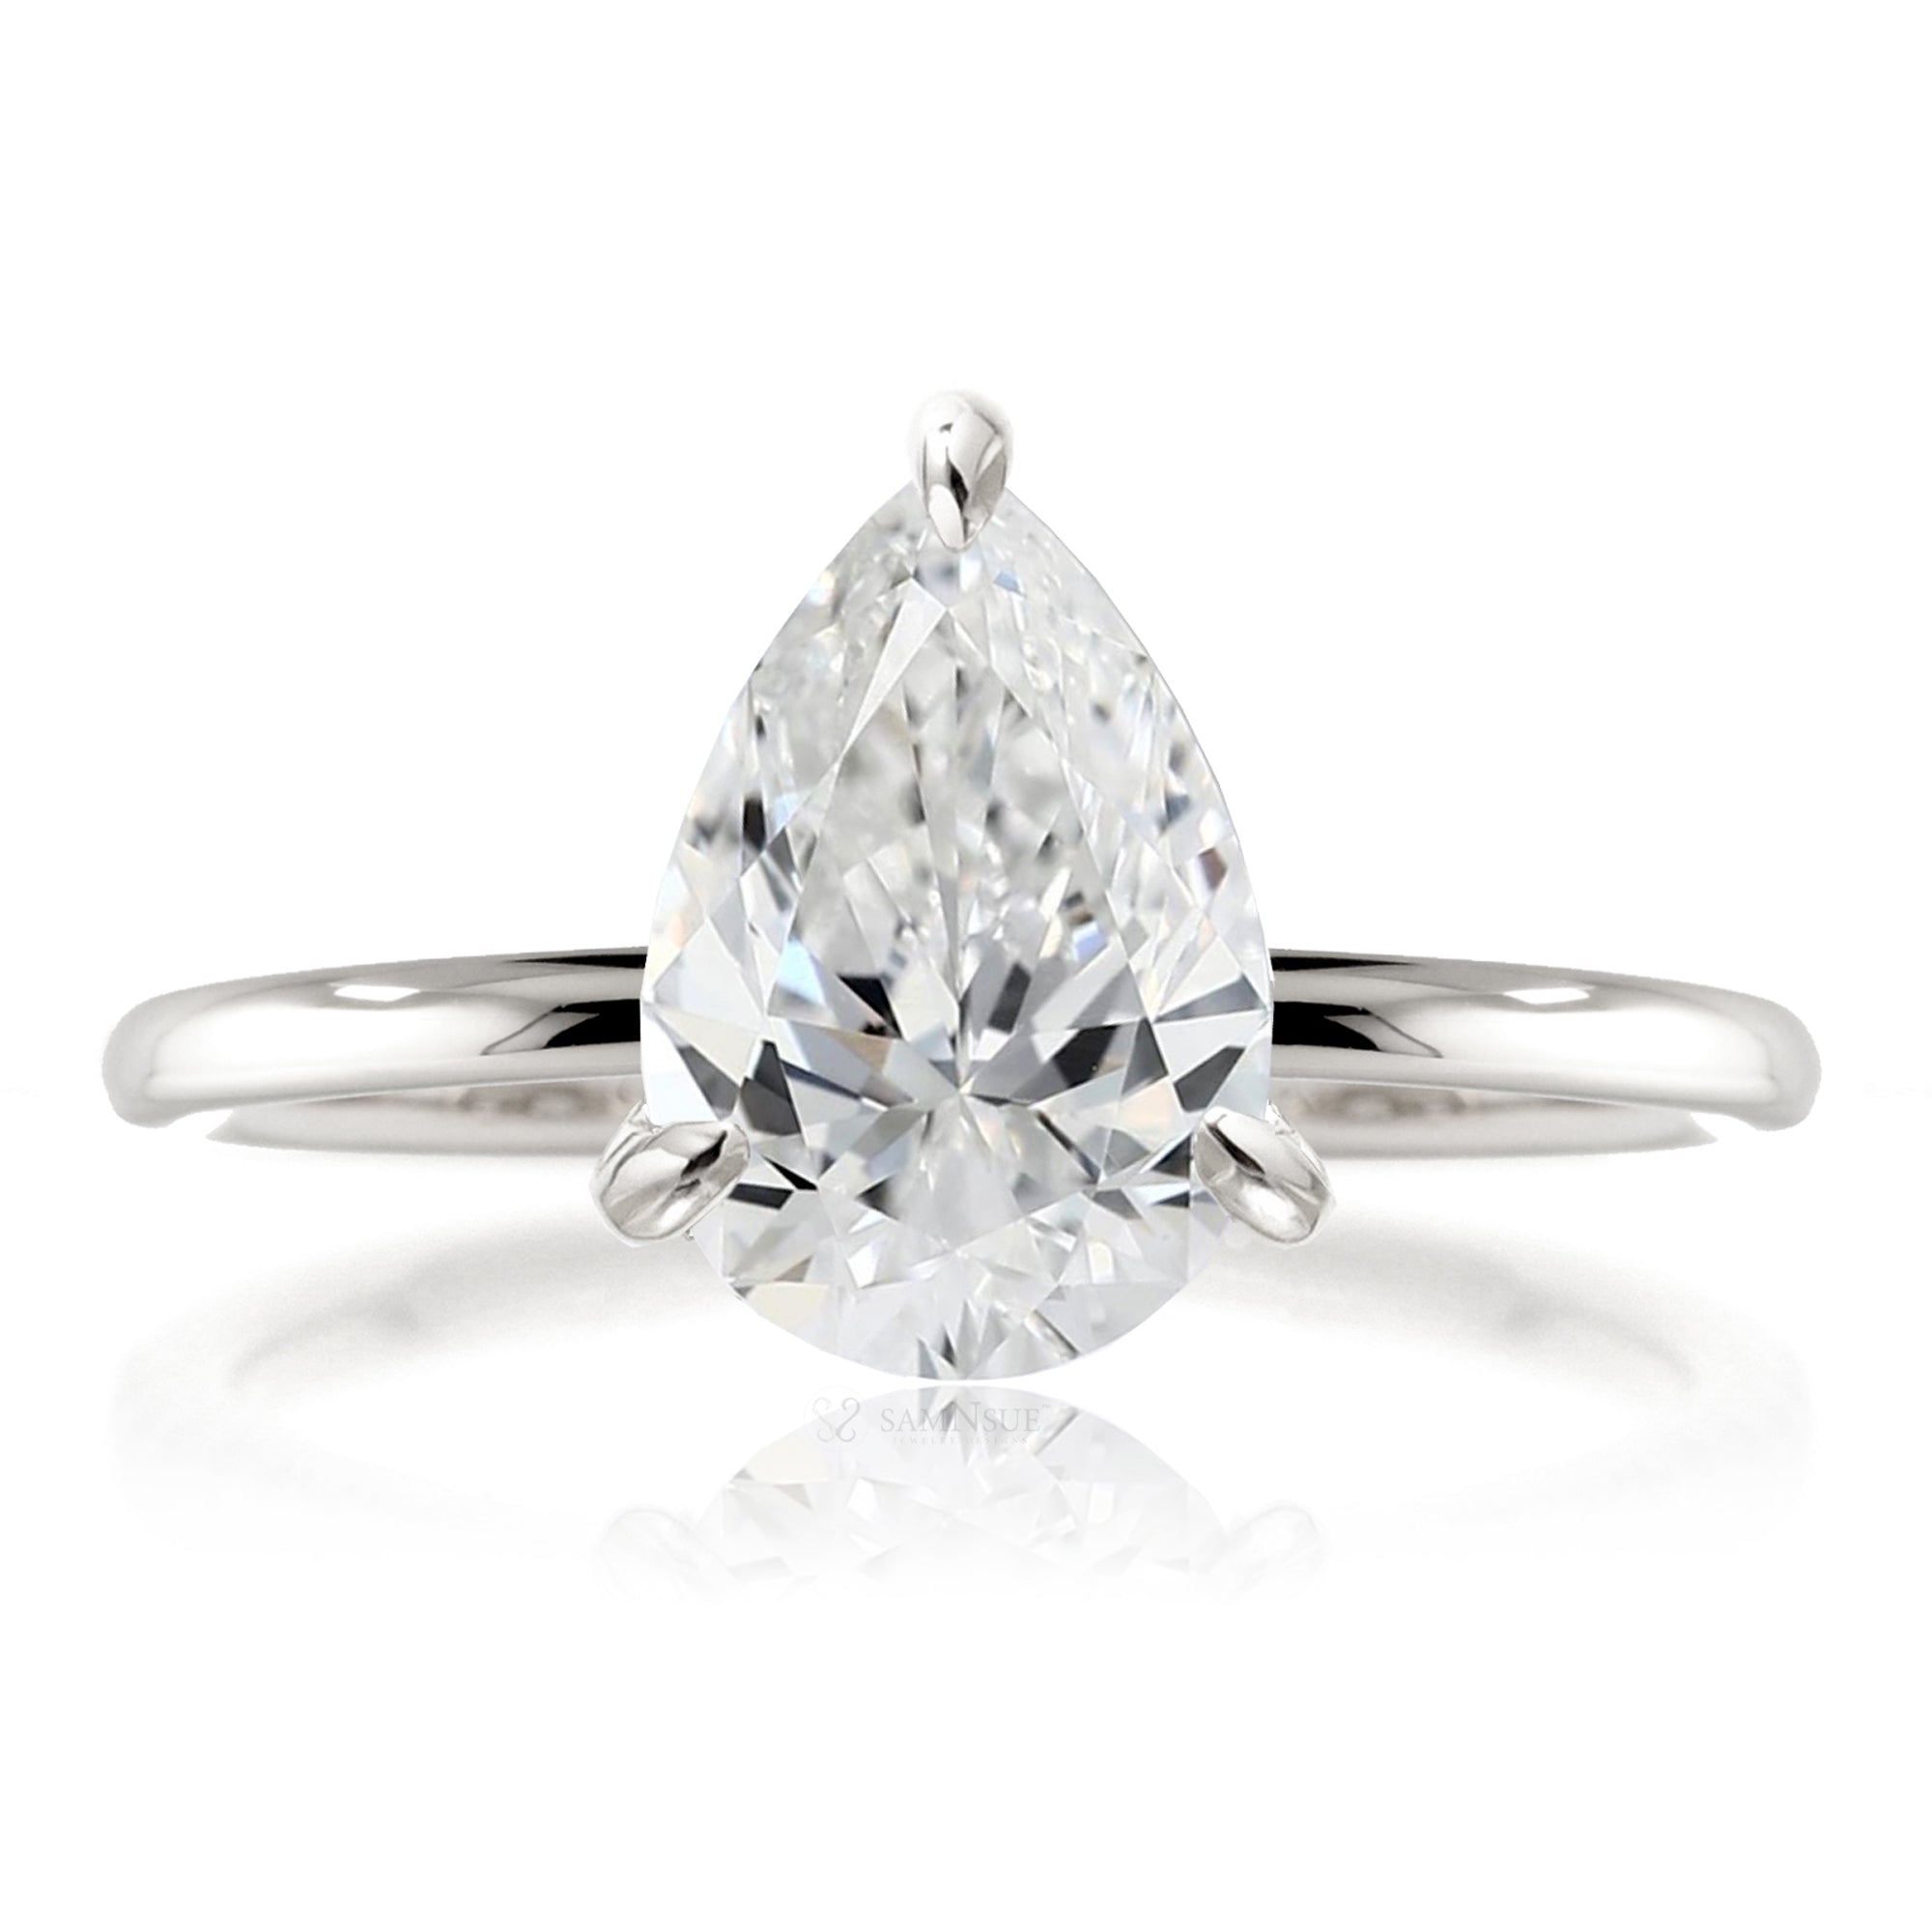 Pear cut lab-grown diamond engagement ring white gold - The Ava solid band